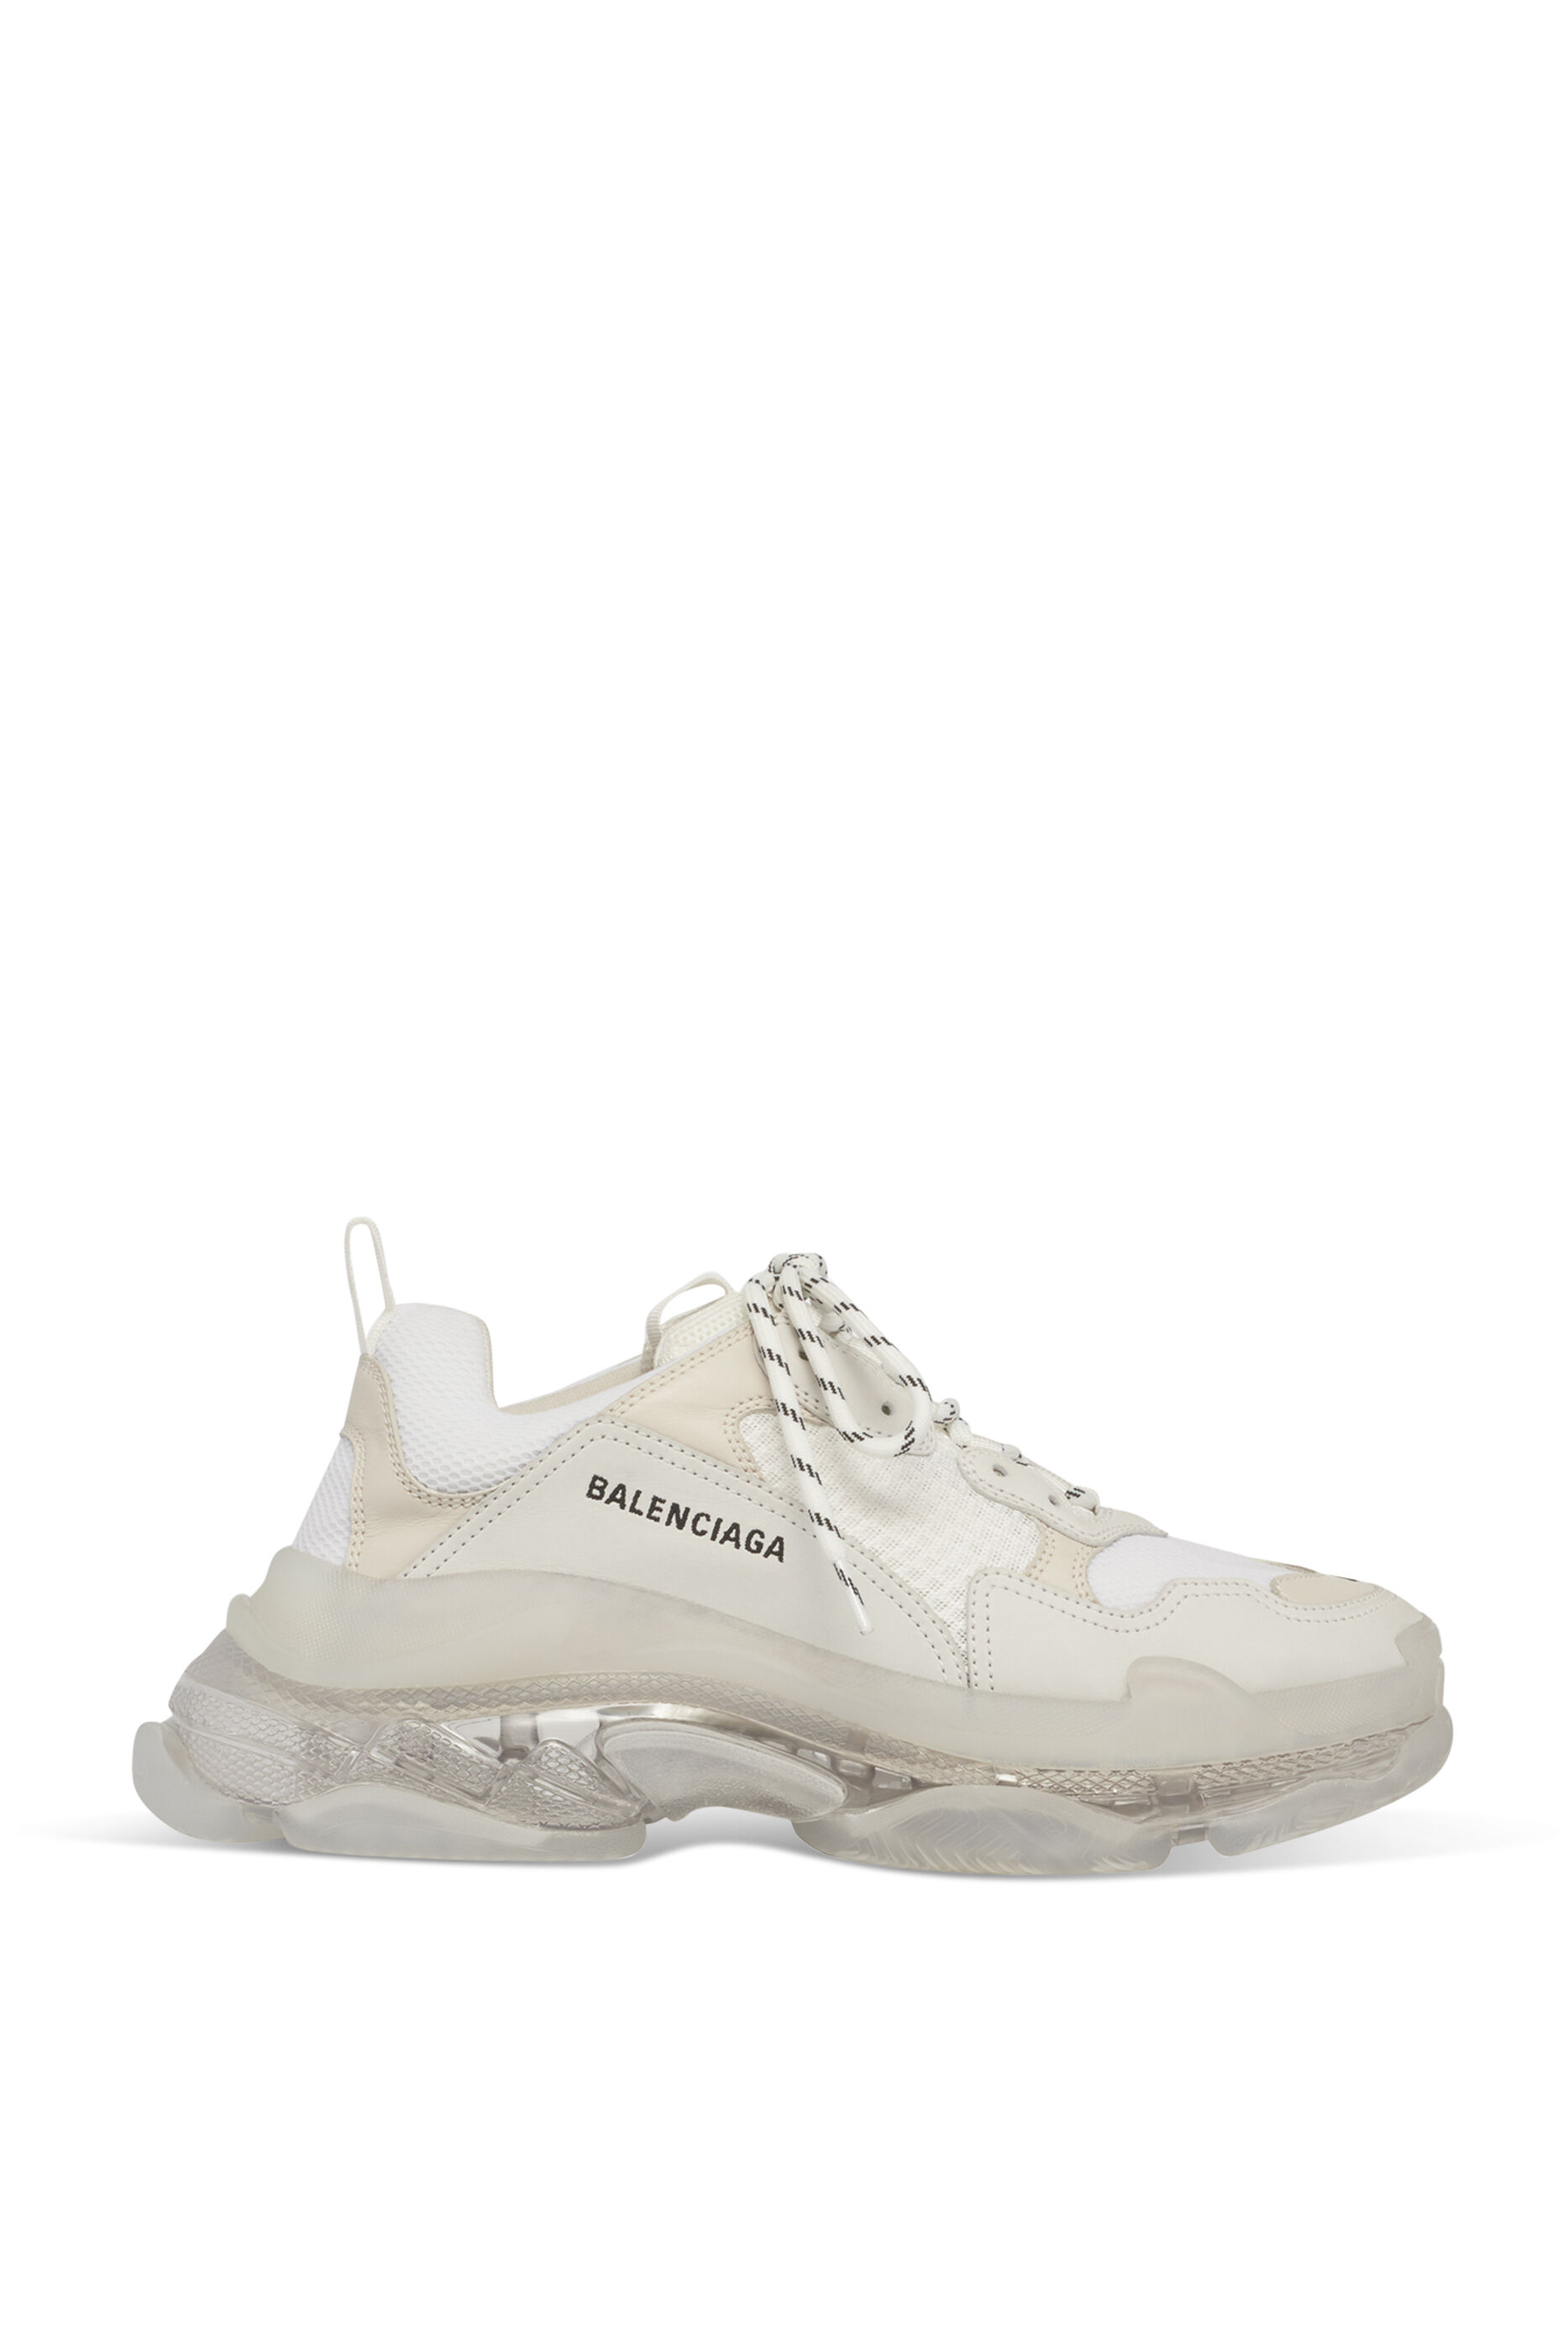 Balenciaga trainers for Sale in Danbury CT  OfferUp